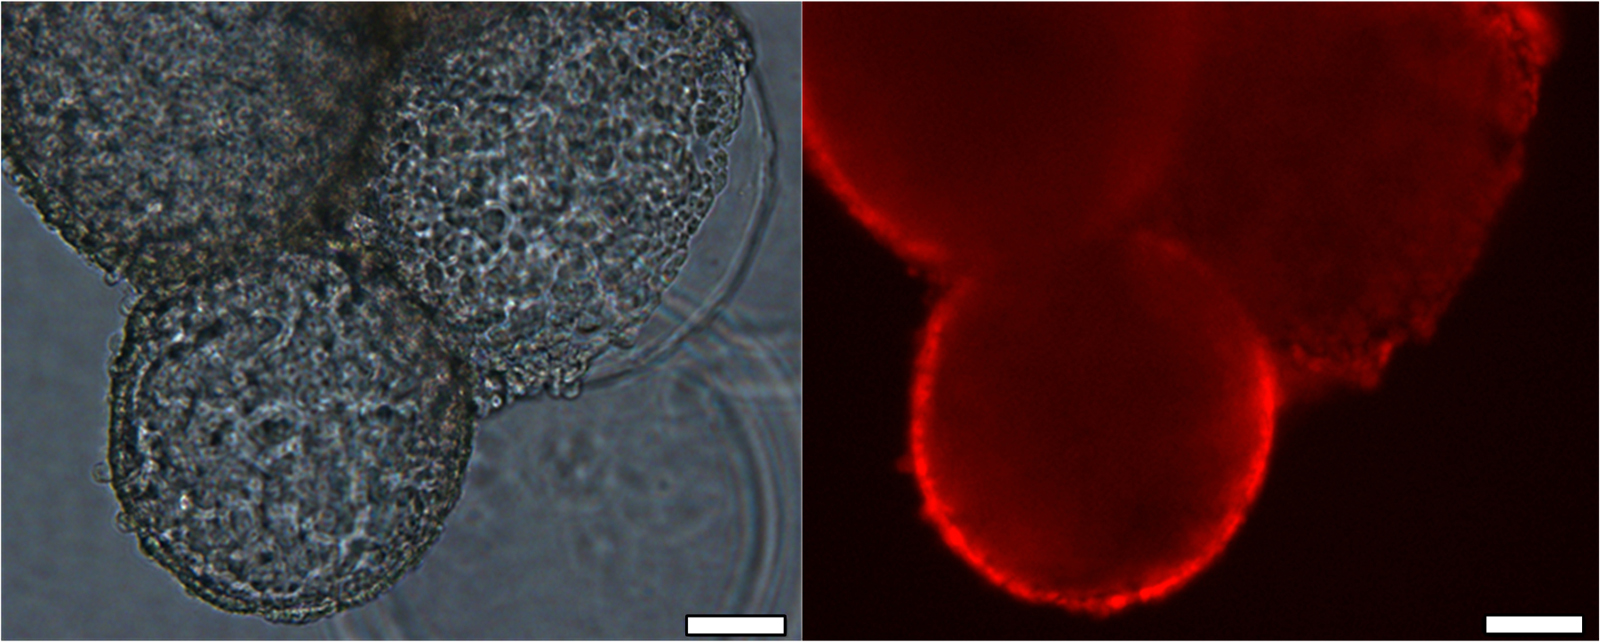 Adherent iPS cells on alginate microcarriers after successful cultivation (left: backlit phase contrast image, right: fluorescent image of pluripotency marker Oct-4, scale: 100 µm).